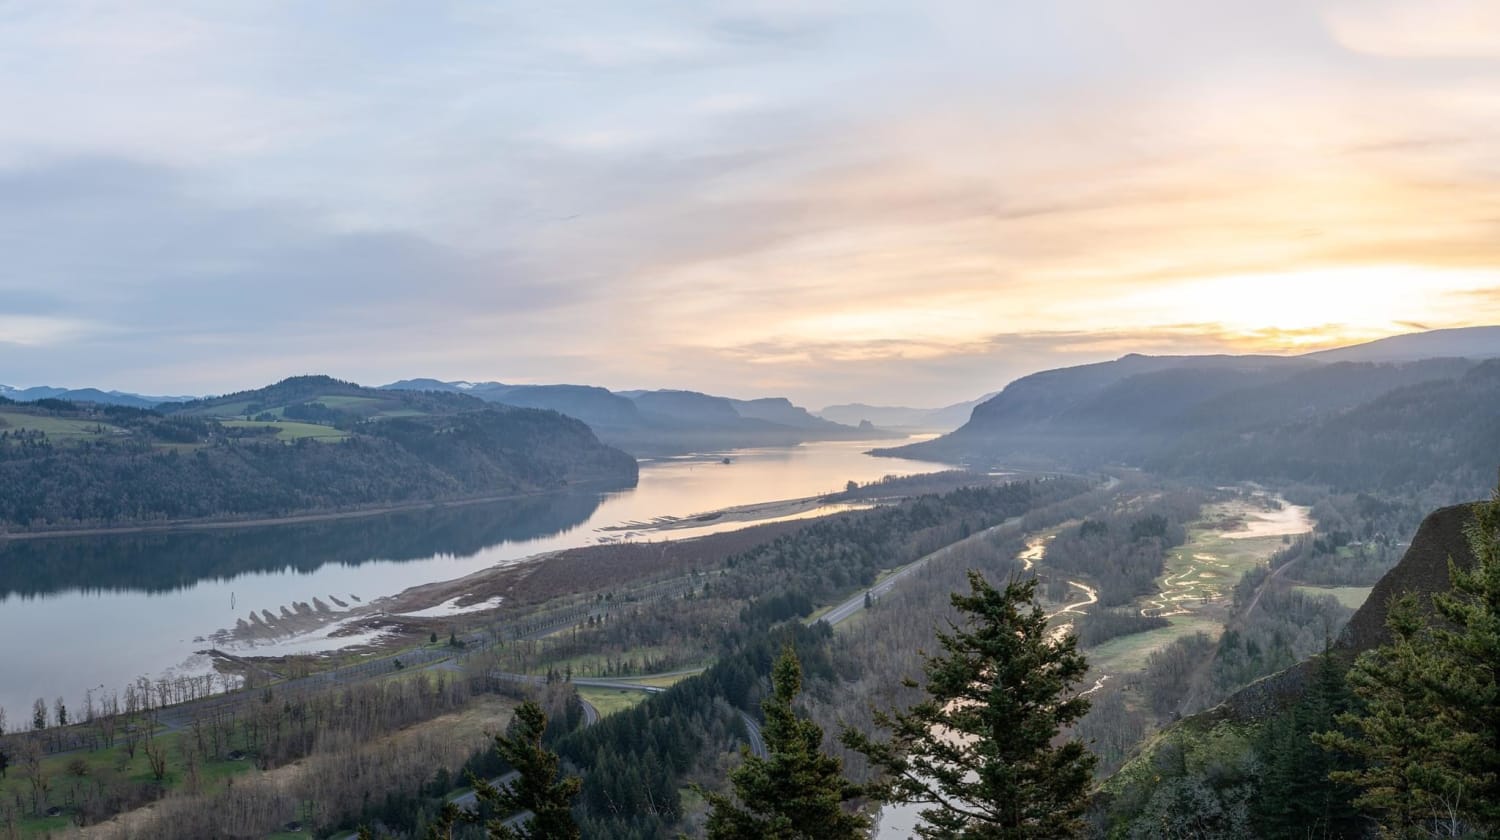 The Columbia River Gorge forms the boundary between Washington and Oregon